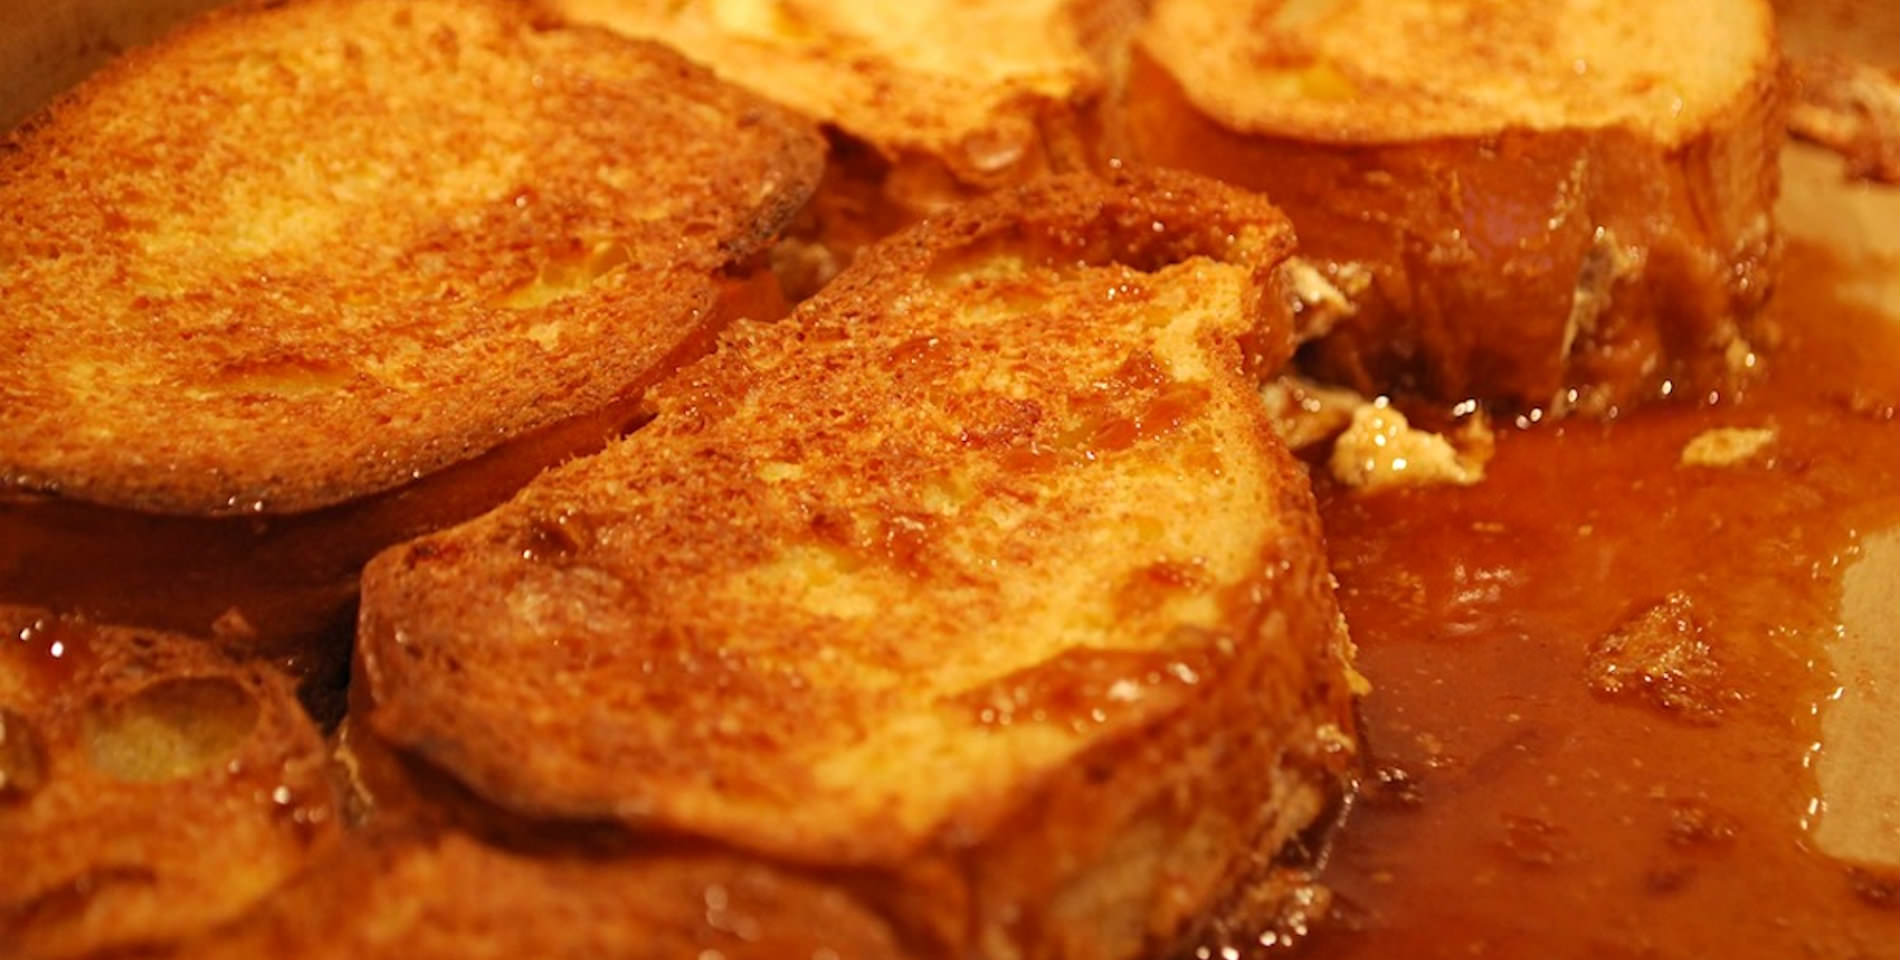 Fresh, golden brown French toast sits in a gooey drizzle of warm syrup. 